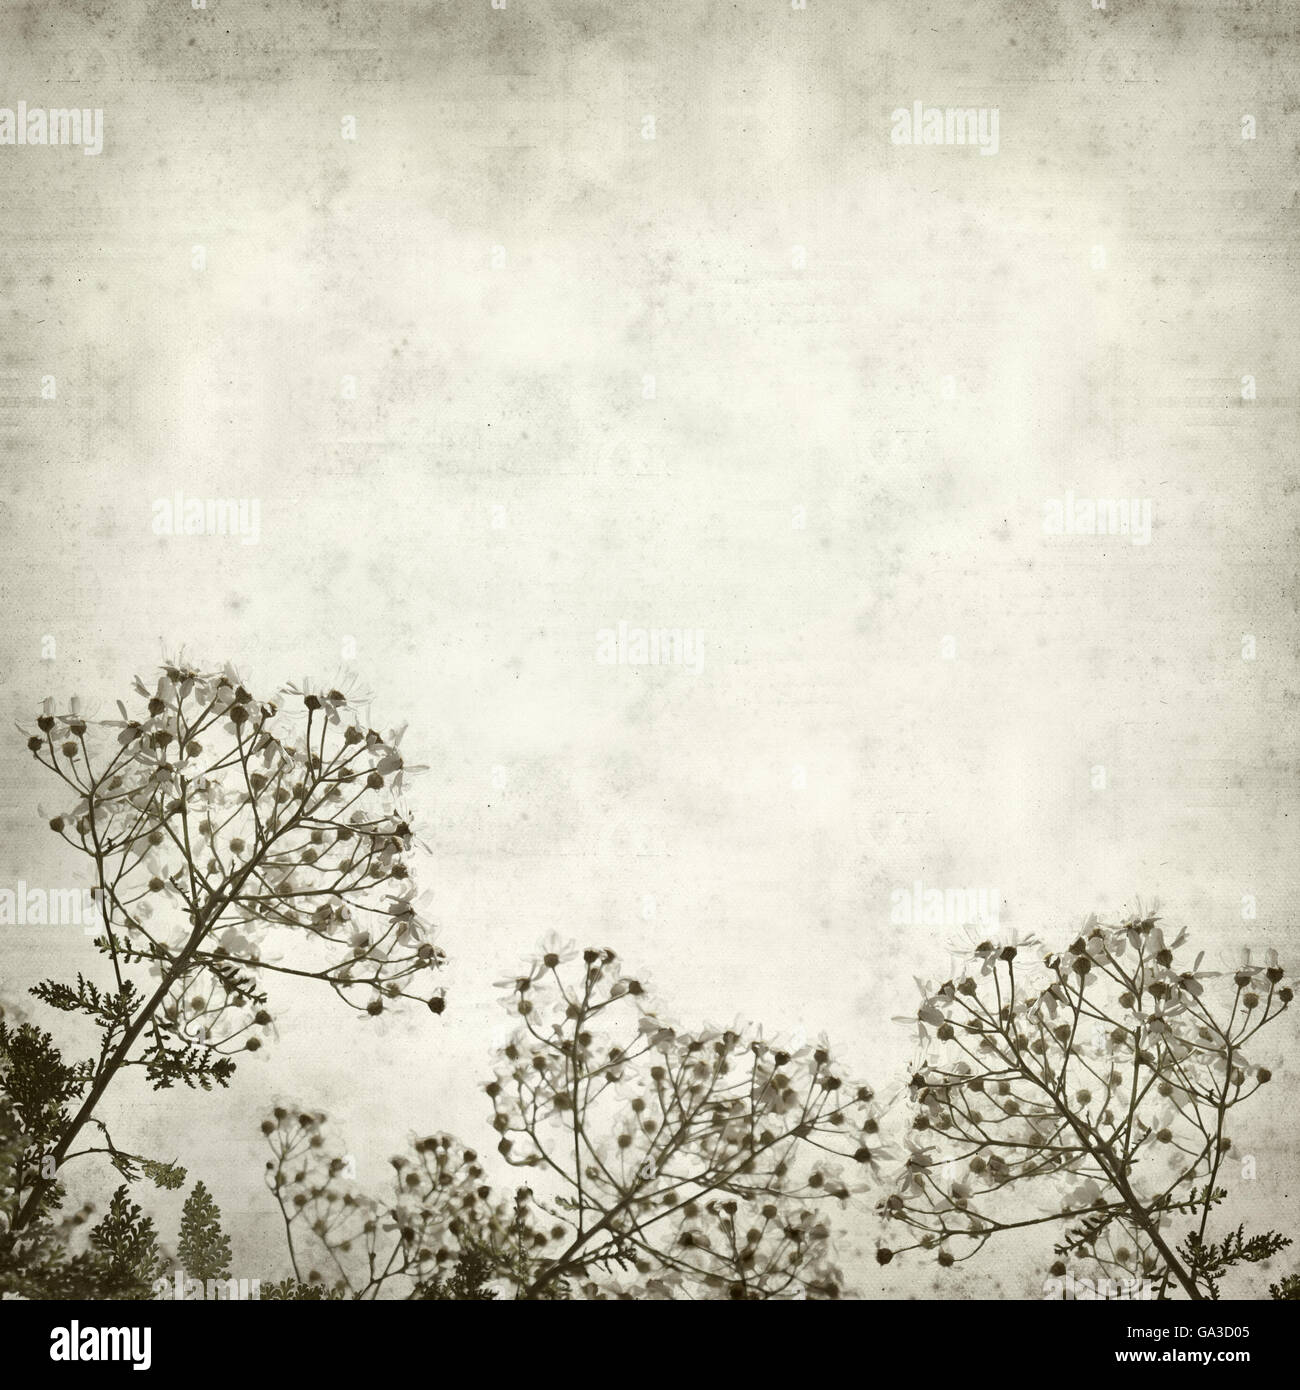 textured old paper background with silver leaf plant Stock Photo